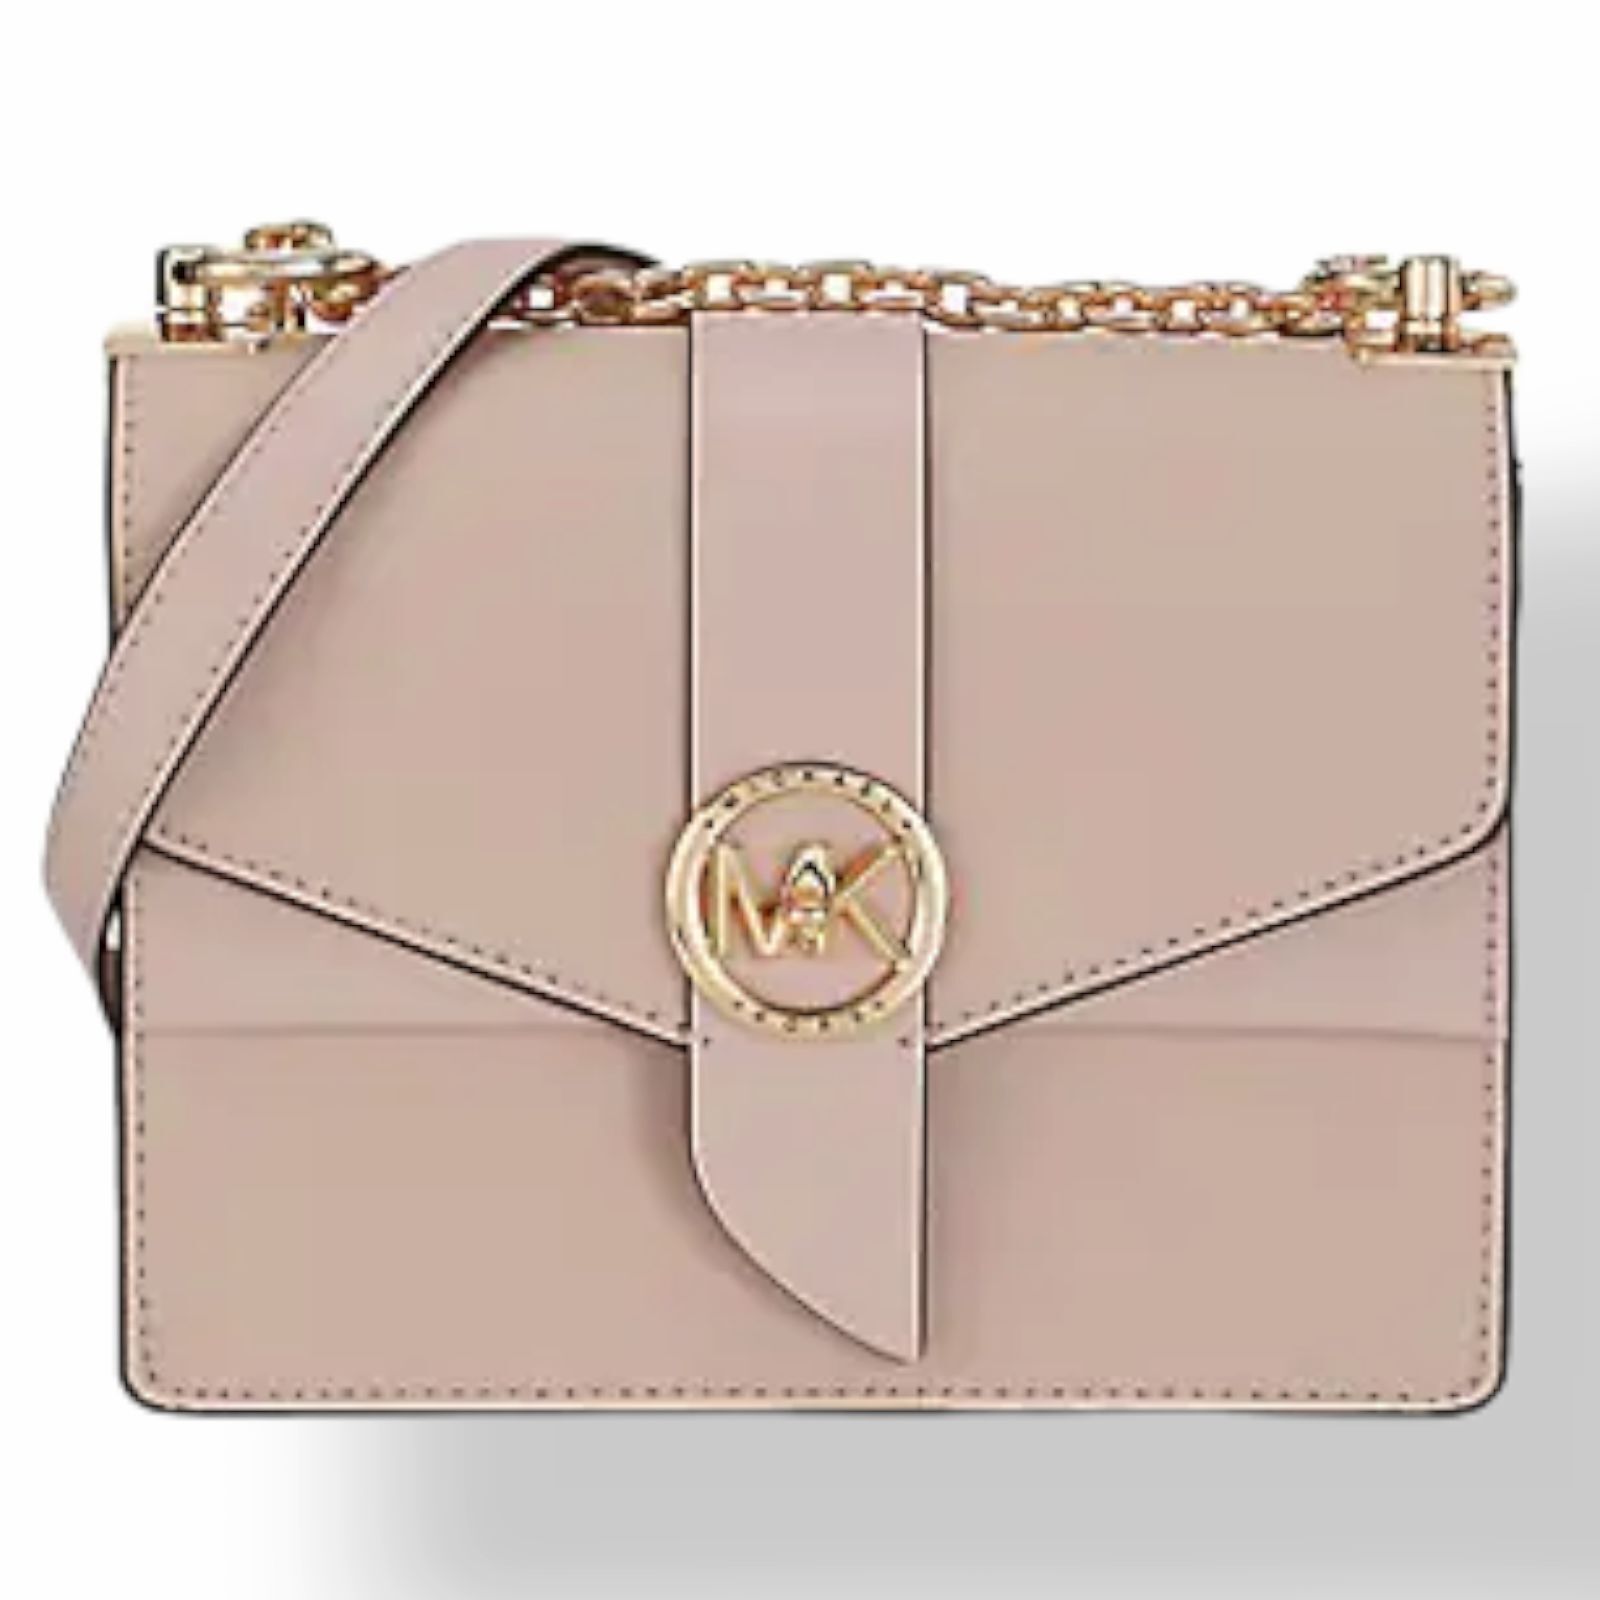 Michael Kors Ladies Greenwich Small Two-Tone Logo and Saffiano Leather Crossbody Bag in Ryl PNK MLT